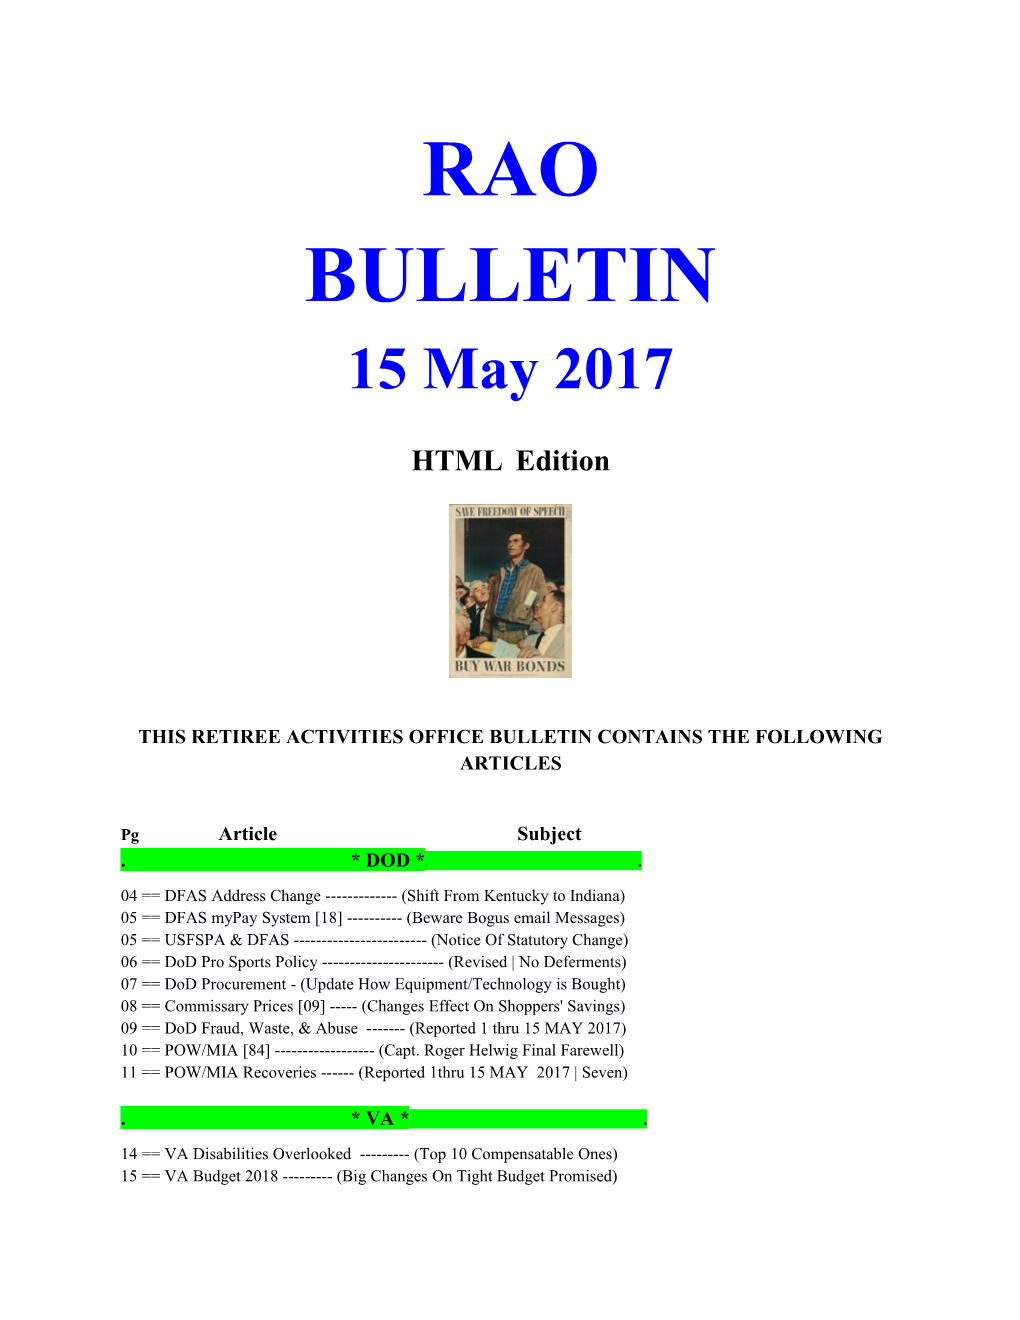 This Retiree Activities Office Bulletin Contains the Following Articles